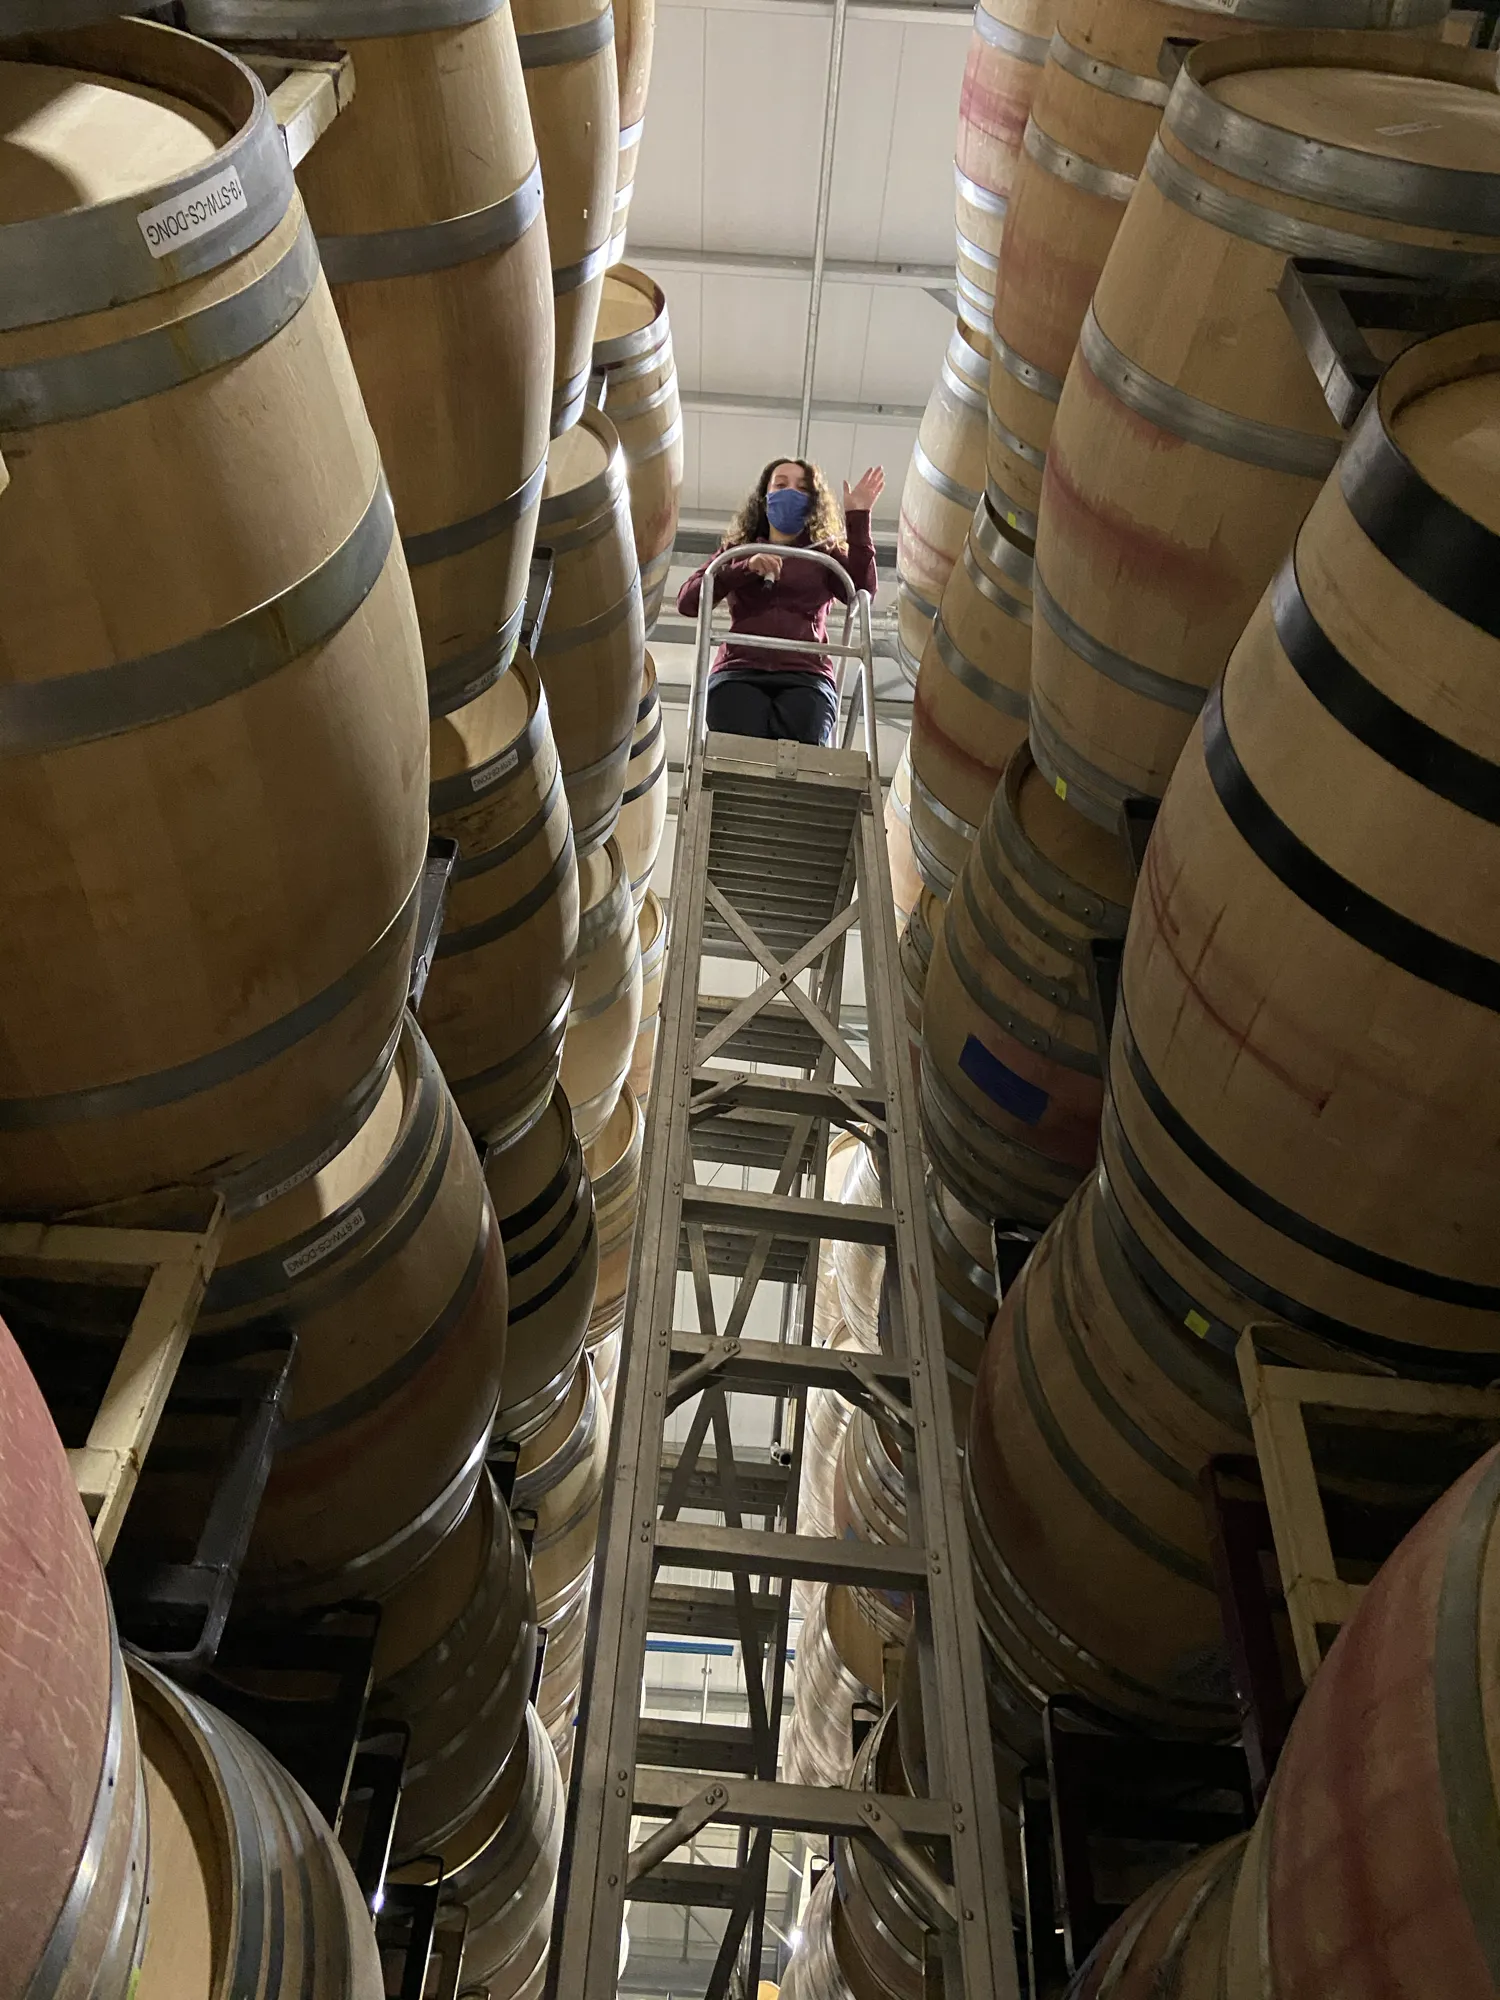 Woman on top of tall ladder at Sugarloaf Wine Co., wine barrel storage and wine production